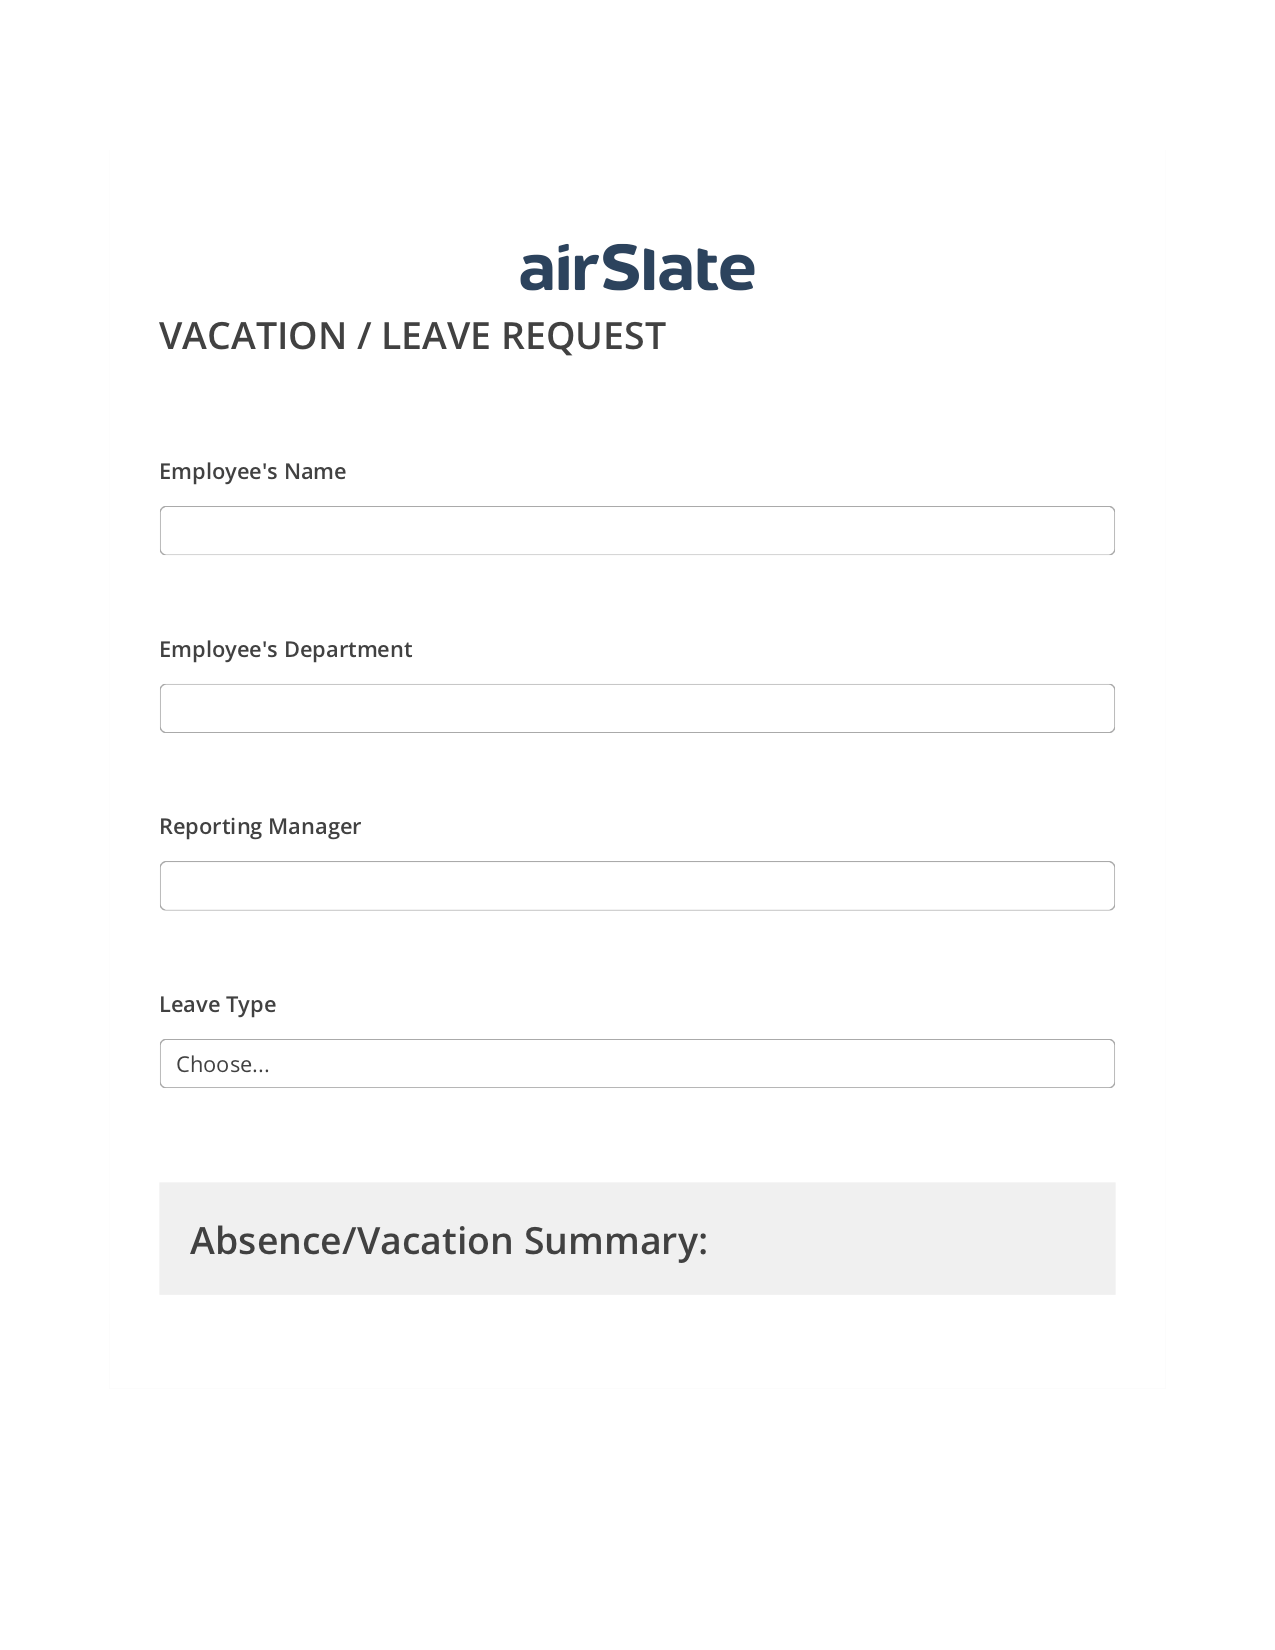 Vacation/Leave Request Workflow System Bot - Slack Two-Way Binding Bot, Remove Slate Bot, Archive to OneDrive Bot